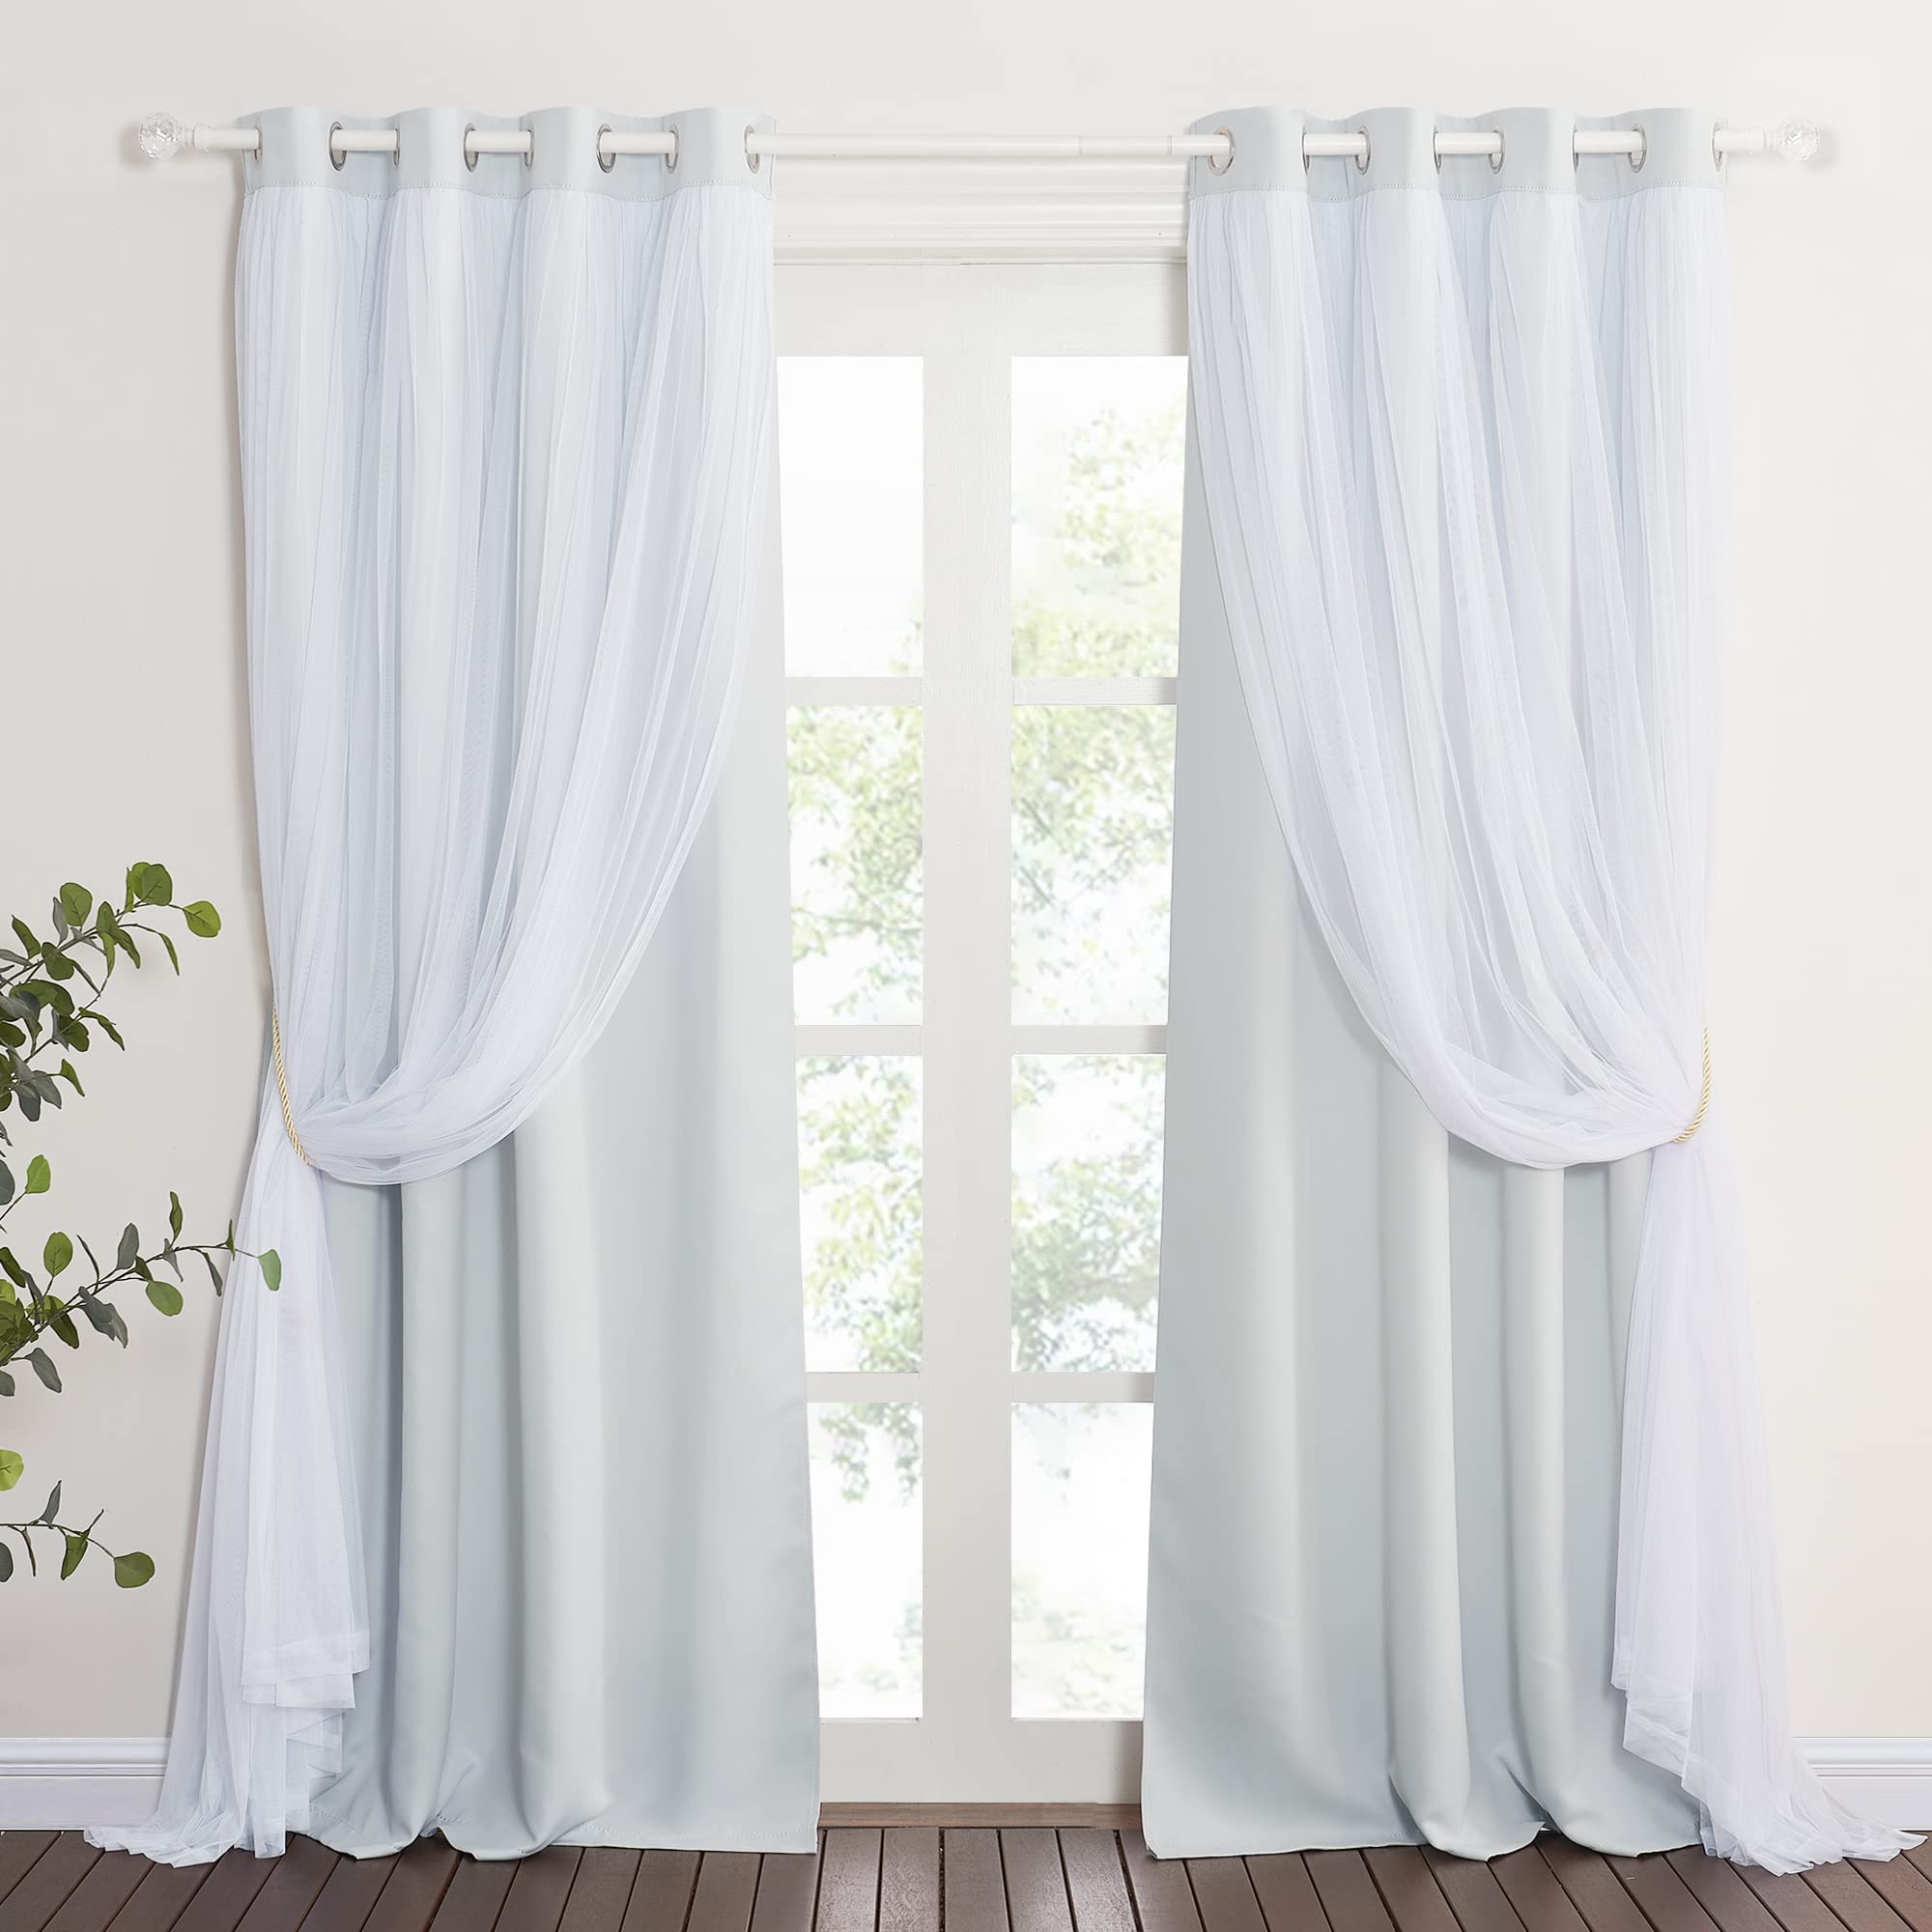 PONY DANCE White Blackout Curtains - Double Layer Curtains 84 Inches Long with Sheer Elegance Grommet Window Panels for Living Room with Extra Tie-...